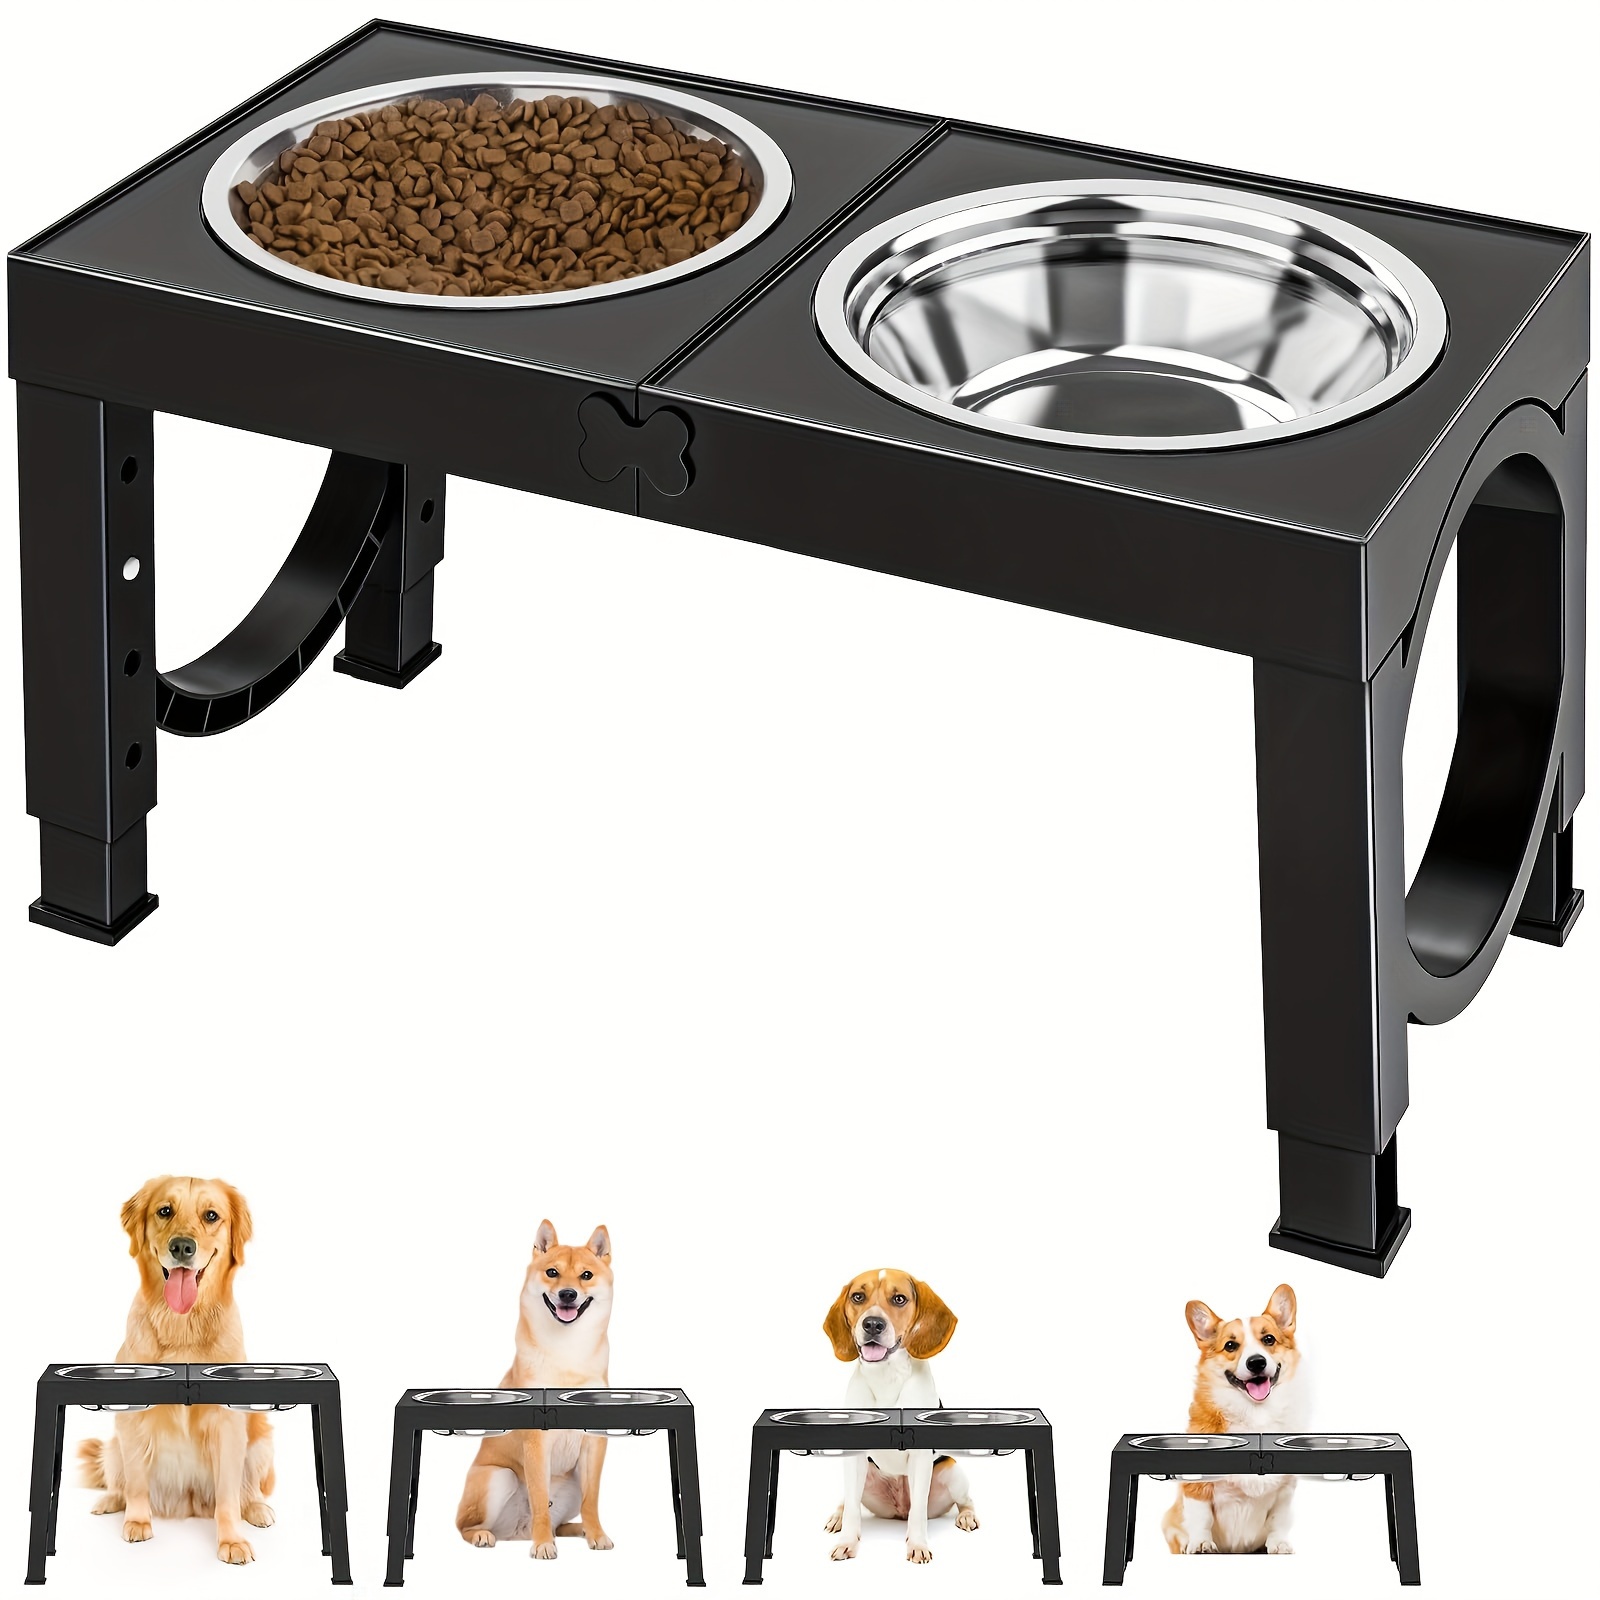 

Adjustable Elevated Dog Bowl Stand With 2 Stainless Steel Bowls - Non-slip, Height-adjustable Feeder For Medium & Large Breeds